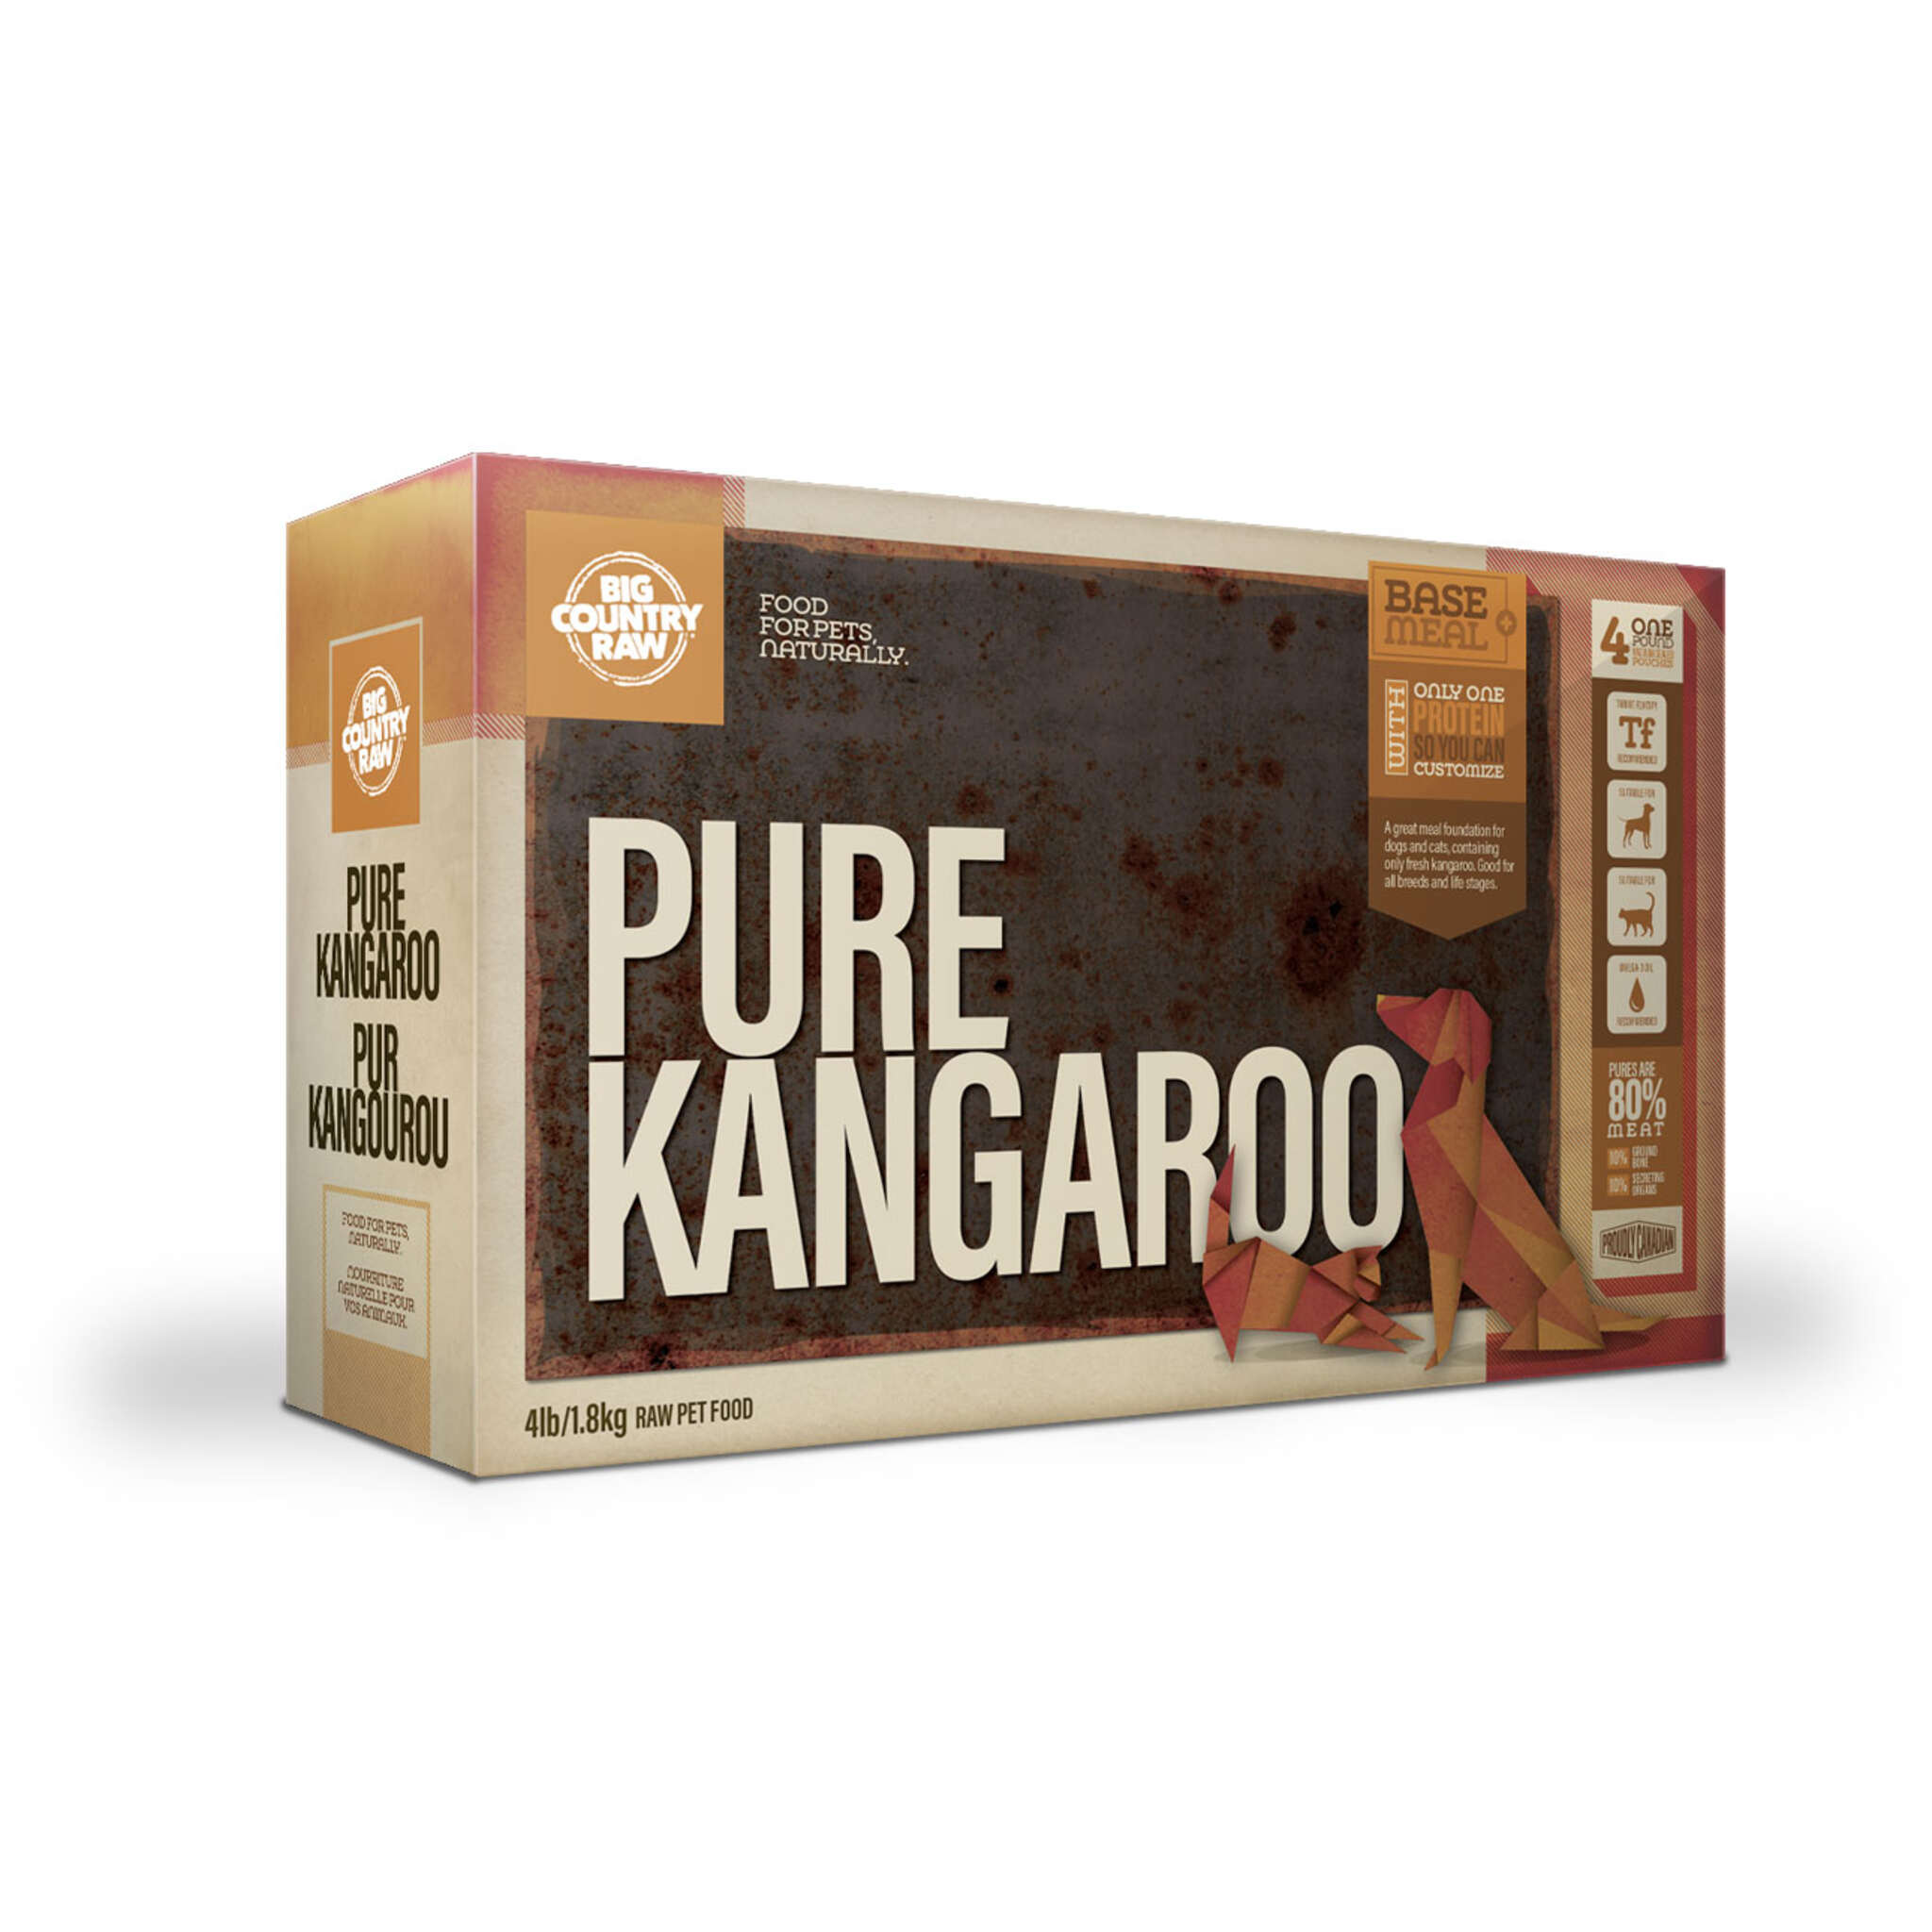 A carton of Big Country Raw dog food, Pure Kangaroo recipe, 4 lb (contains four 1 lb patties), requires supplementation and freezing.